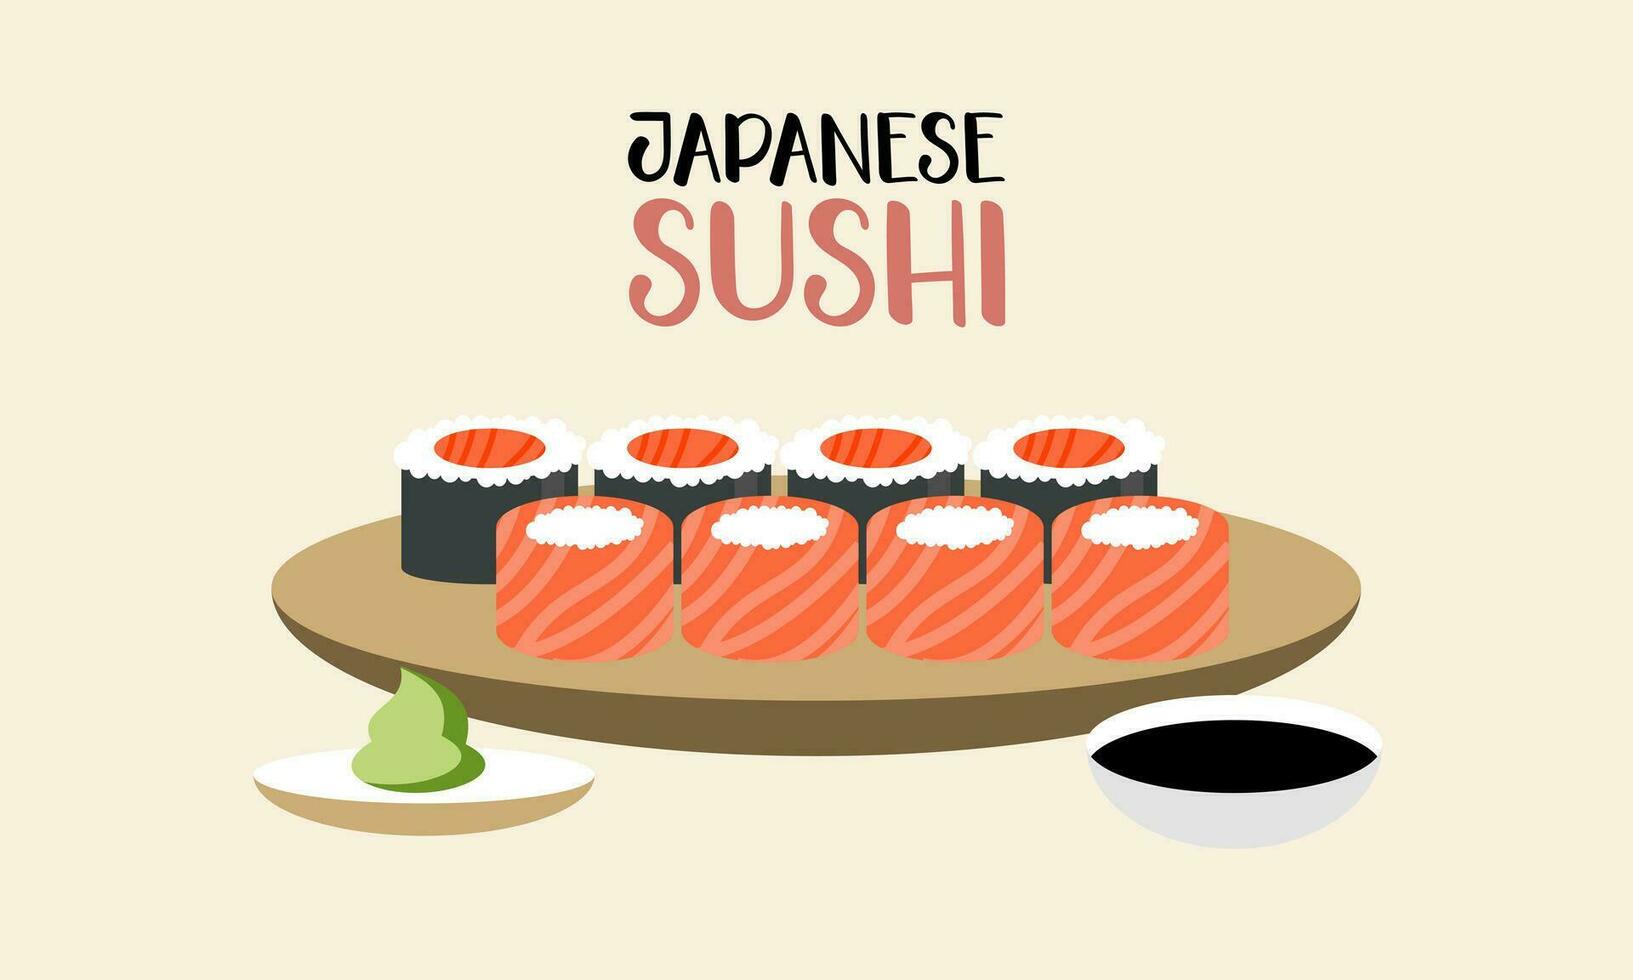 Vintage sushi poster design with vector sushi character